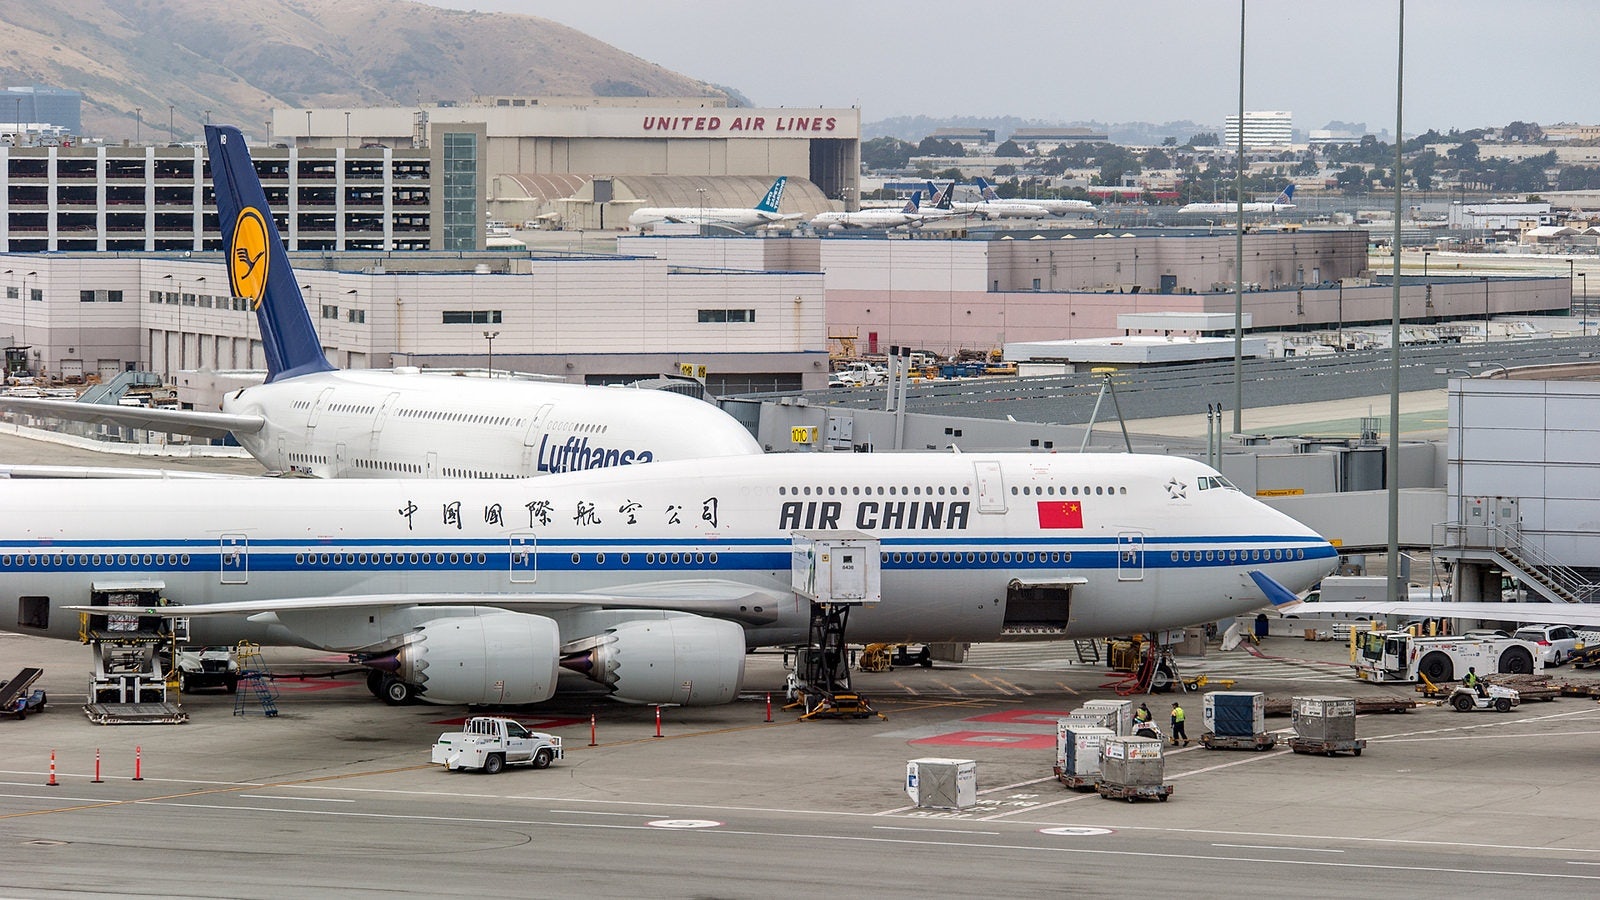 Air China and Lufthansa are taking their cooperation to the next level to more effectively compete in travel between China and Europe. (Flickr/<a href="https://www.flickr.com/photos/iflyfsx/18062230722/">iflyfsx</a>)